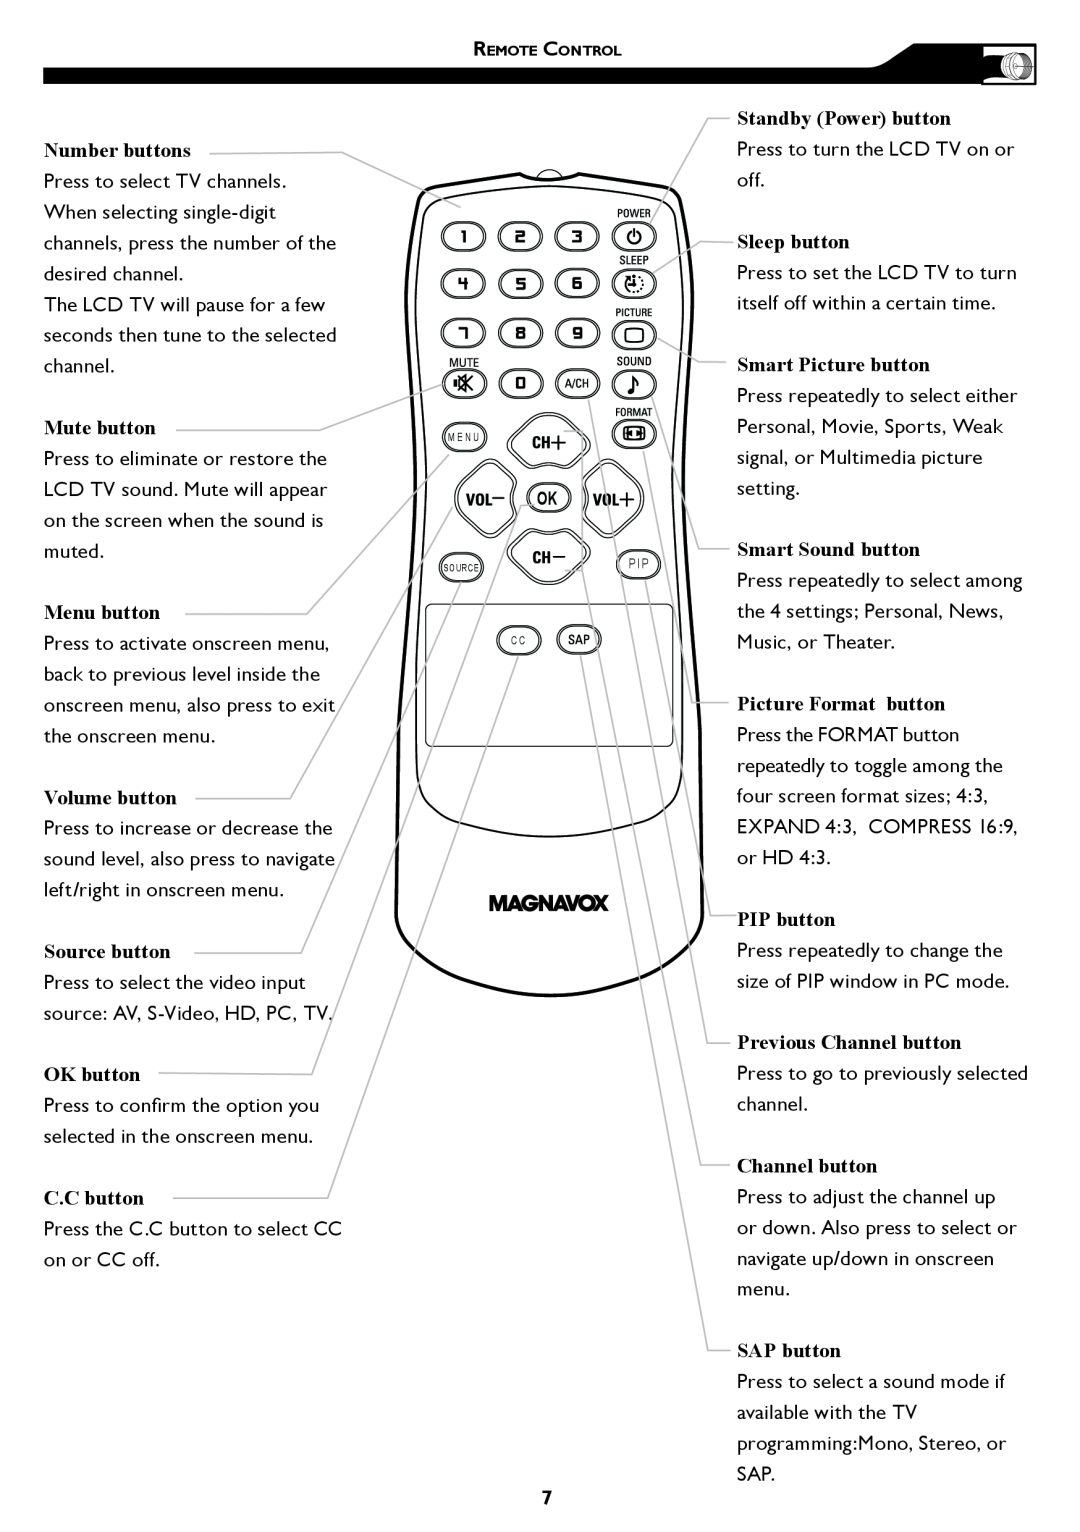 Magnavox 15MF/20MF owner manual Number buttons 